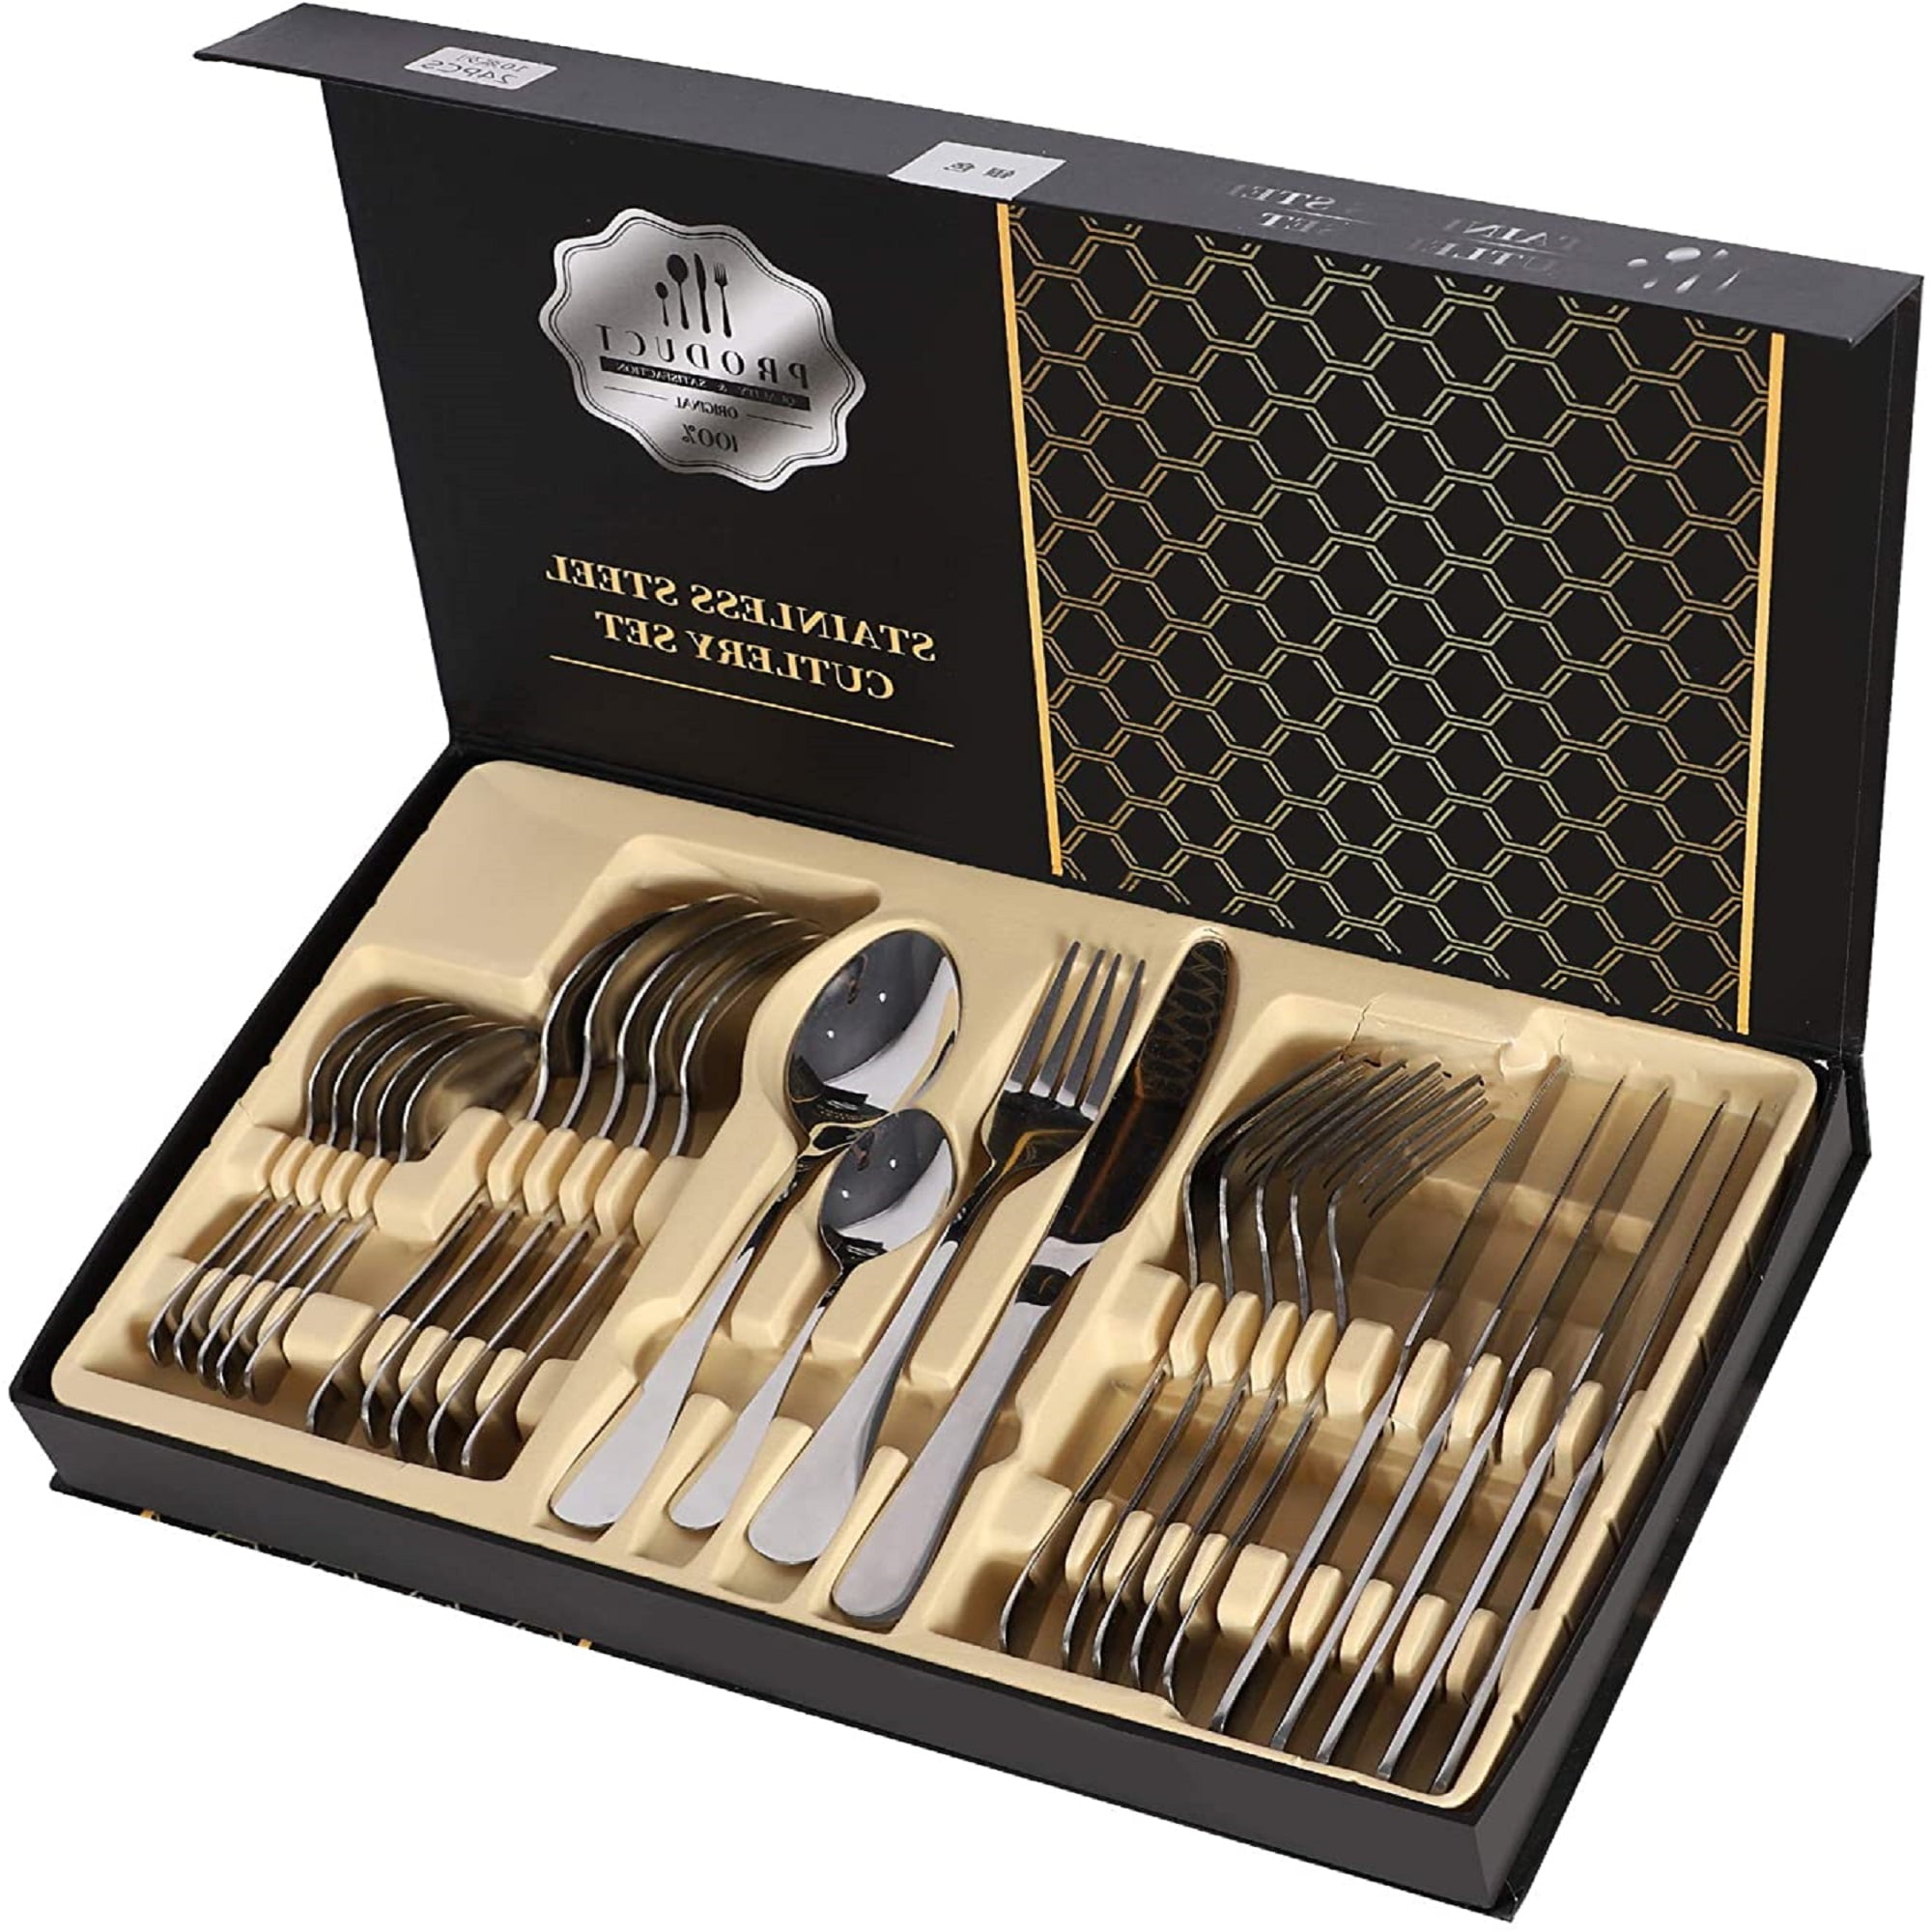 Gold Mirror Polished and Matte Black Painted Dishwasher Safe Cutlery Utensils Set Service for 4 20 Piece Silverware Set Stainless Steel Flatware Set Includes Spoons Forks Knives 